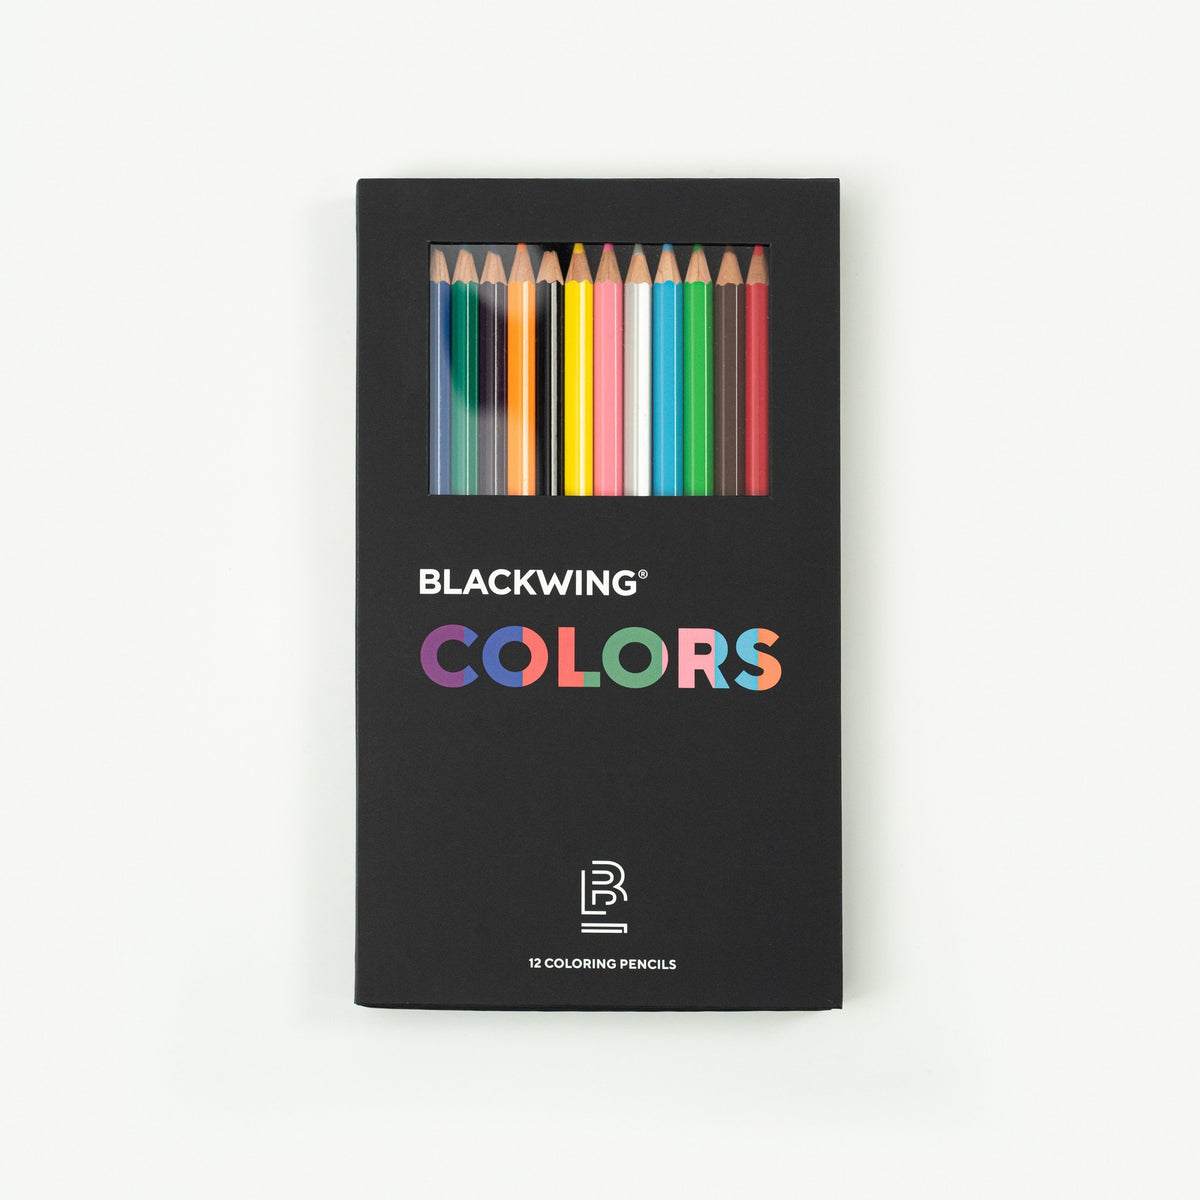 Blackwing Colors - Blackwing Color Pencils